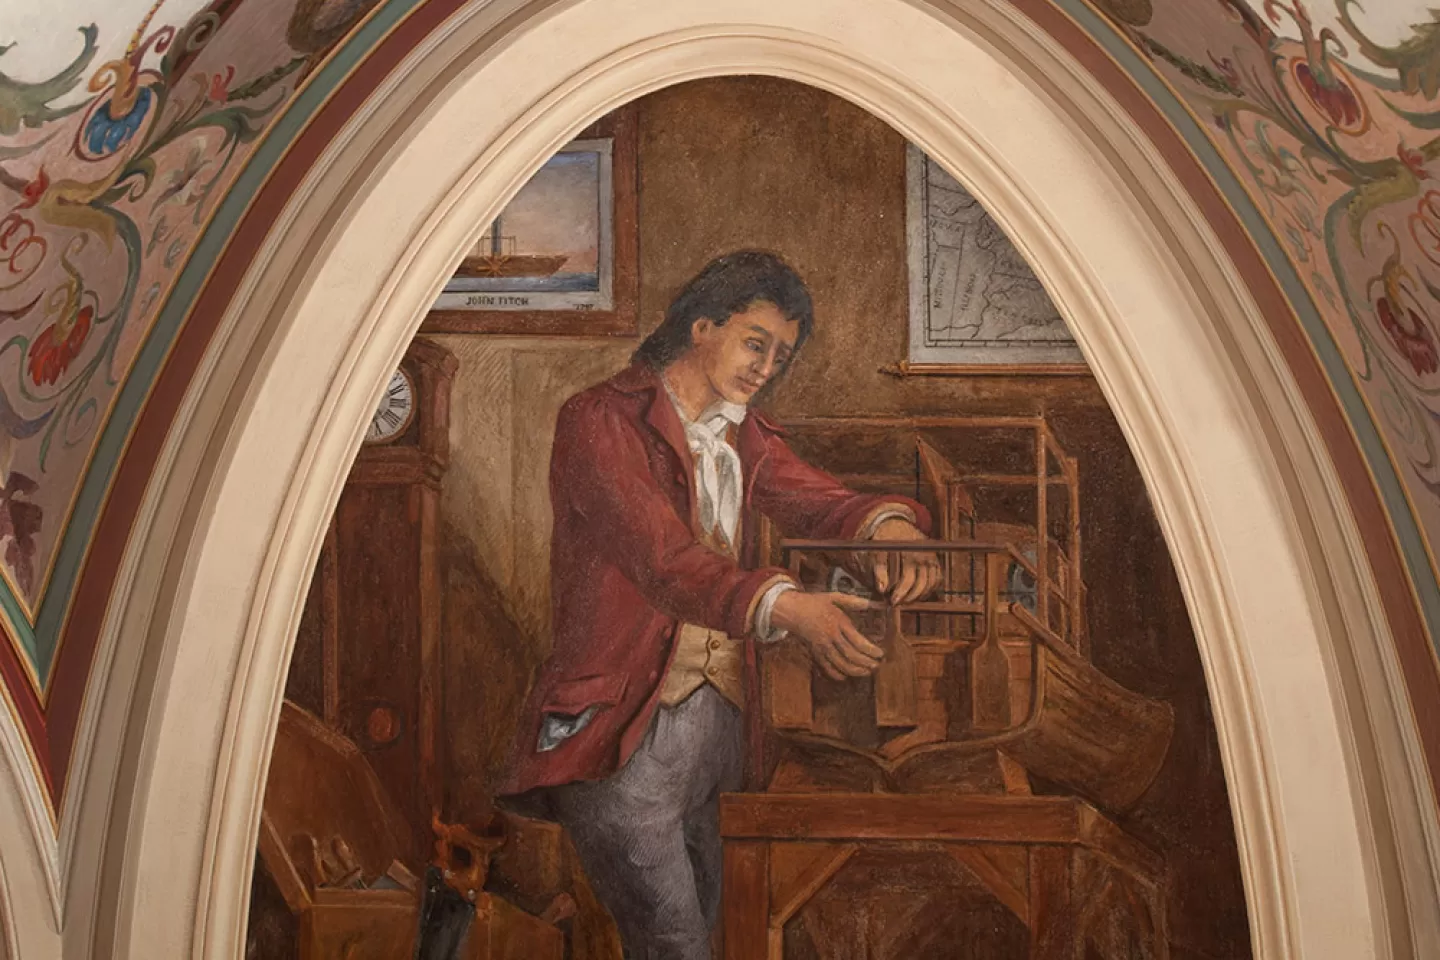 Fresco of John Fitch in the Brumidi Corridors after conservation.